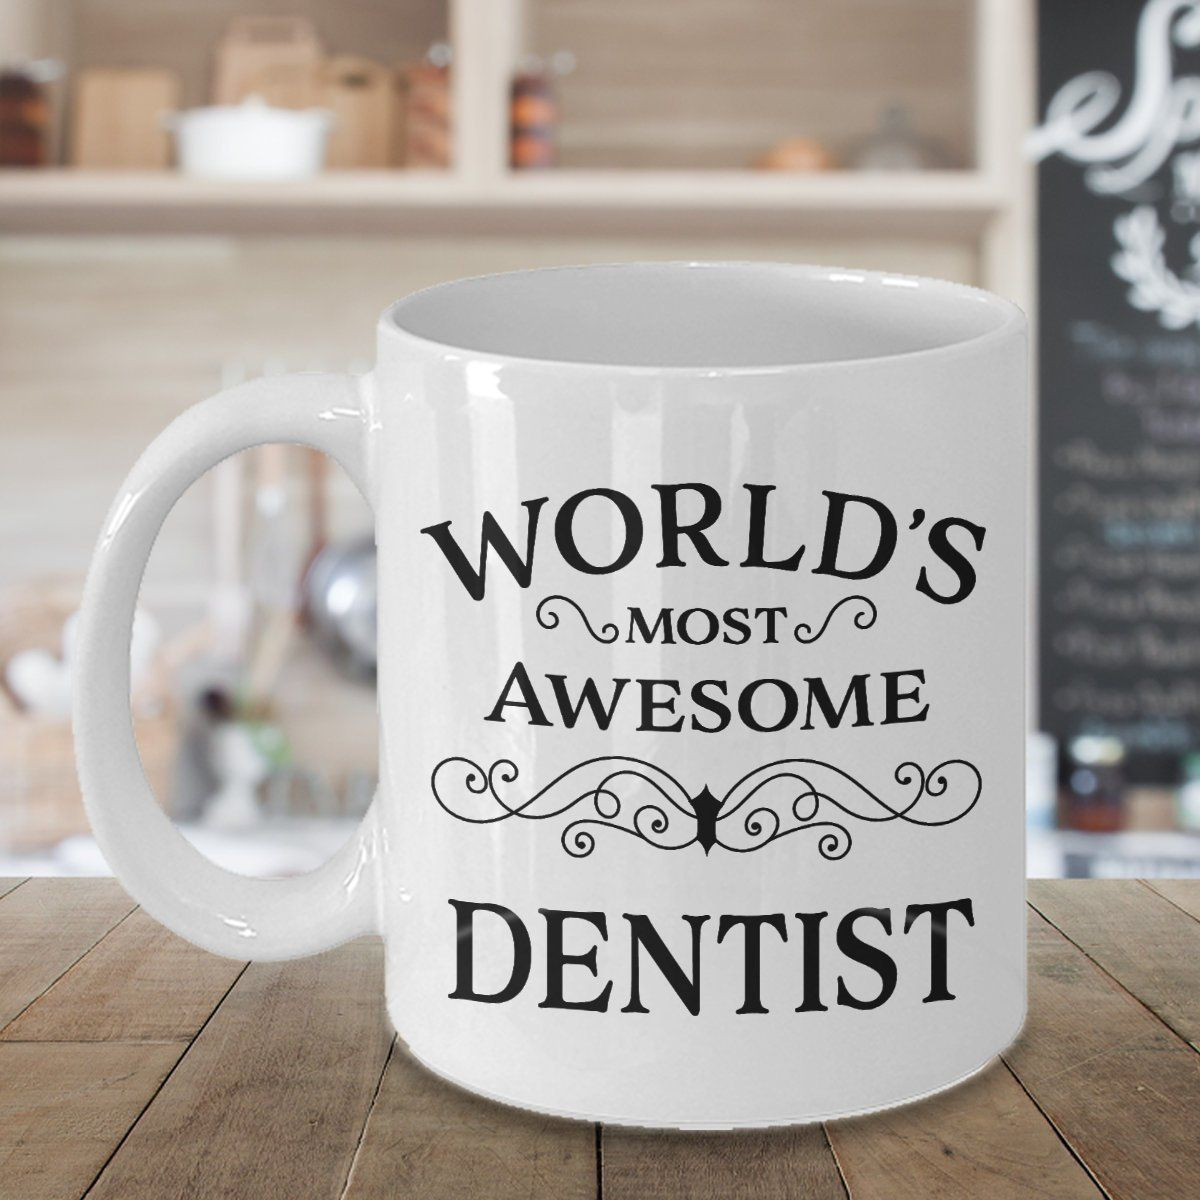 Thank You Gift Ideas For Male Friends
 Dentist Thank You Gift Ideas for Best Friend Coworker Boss